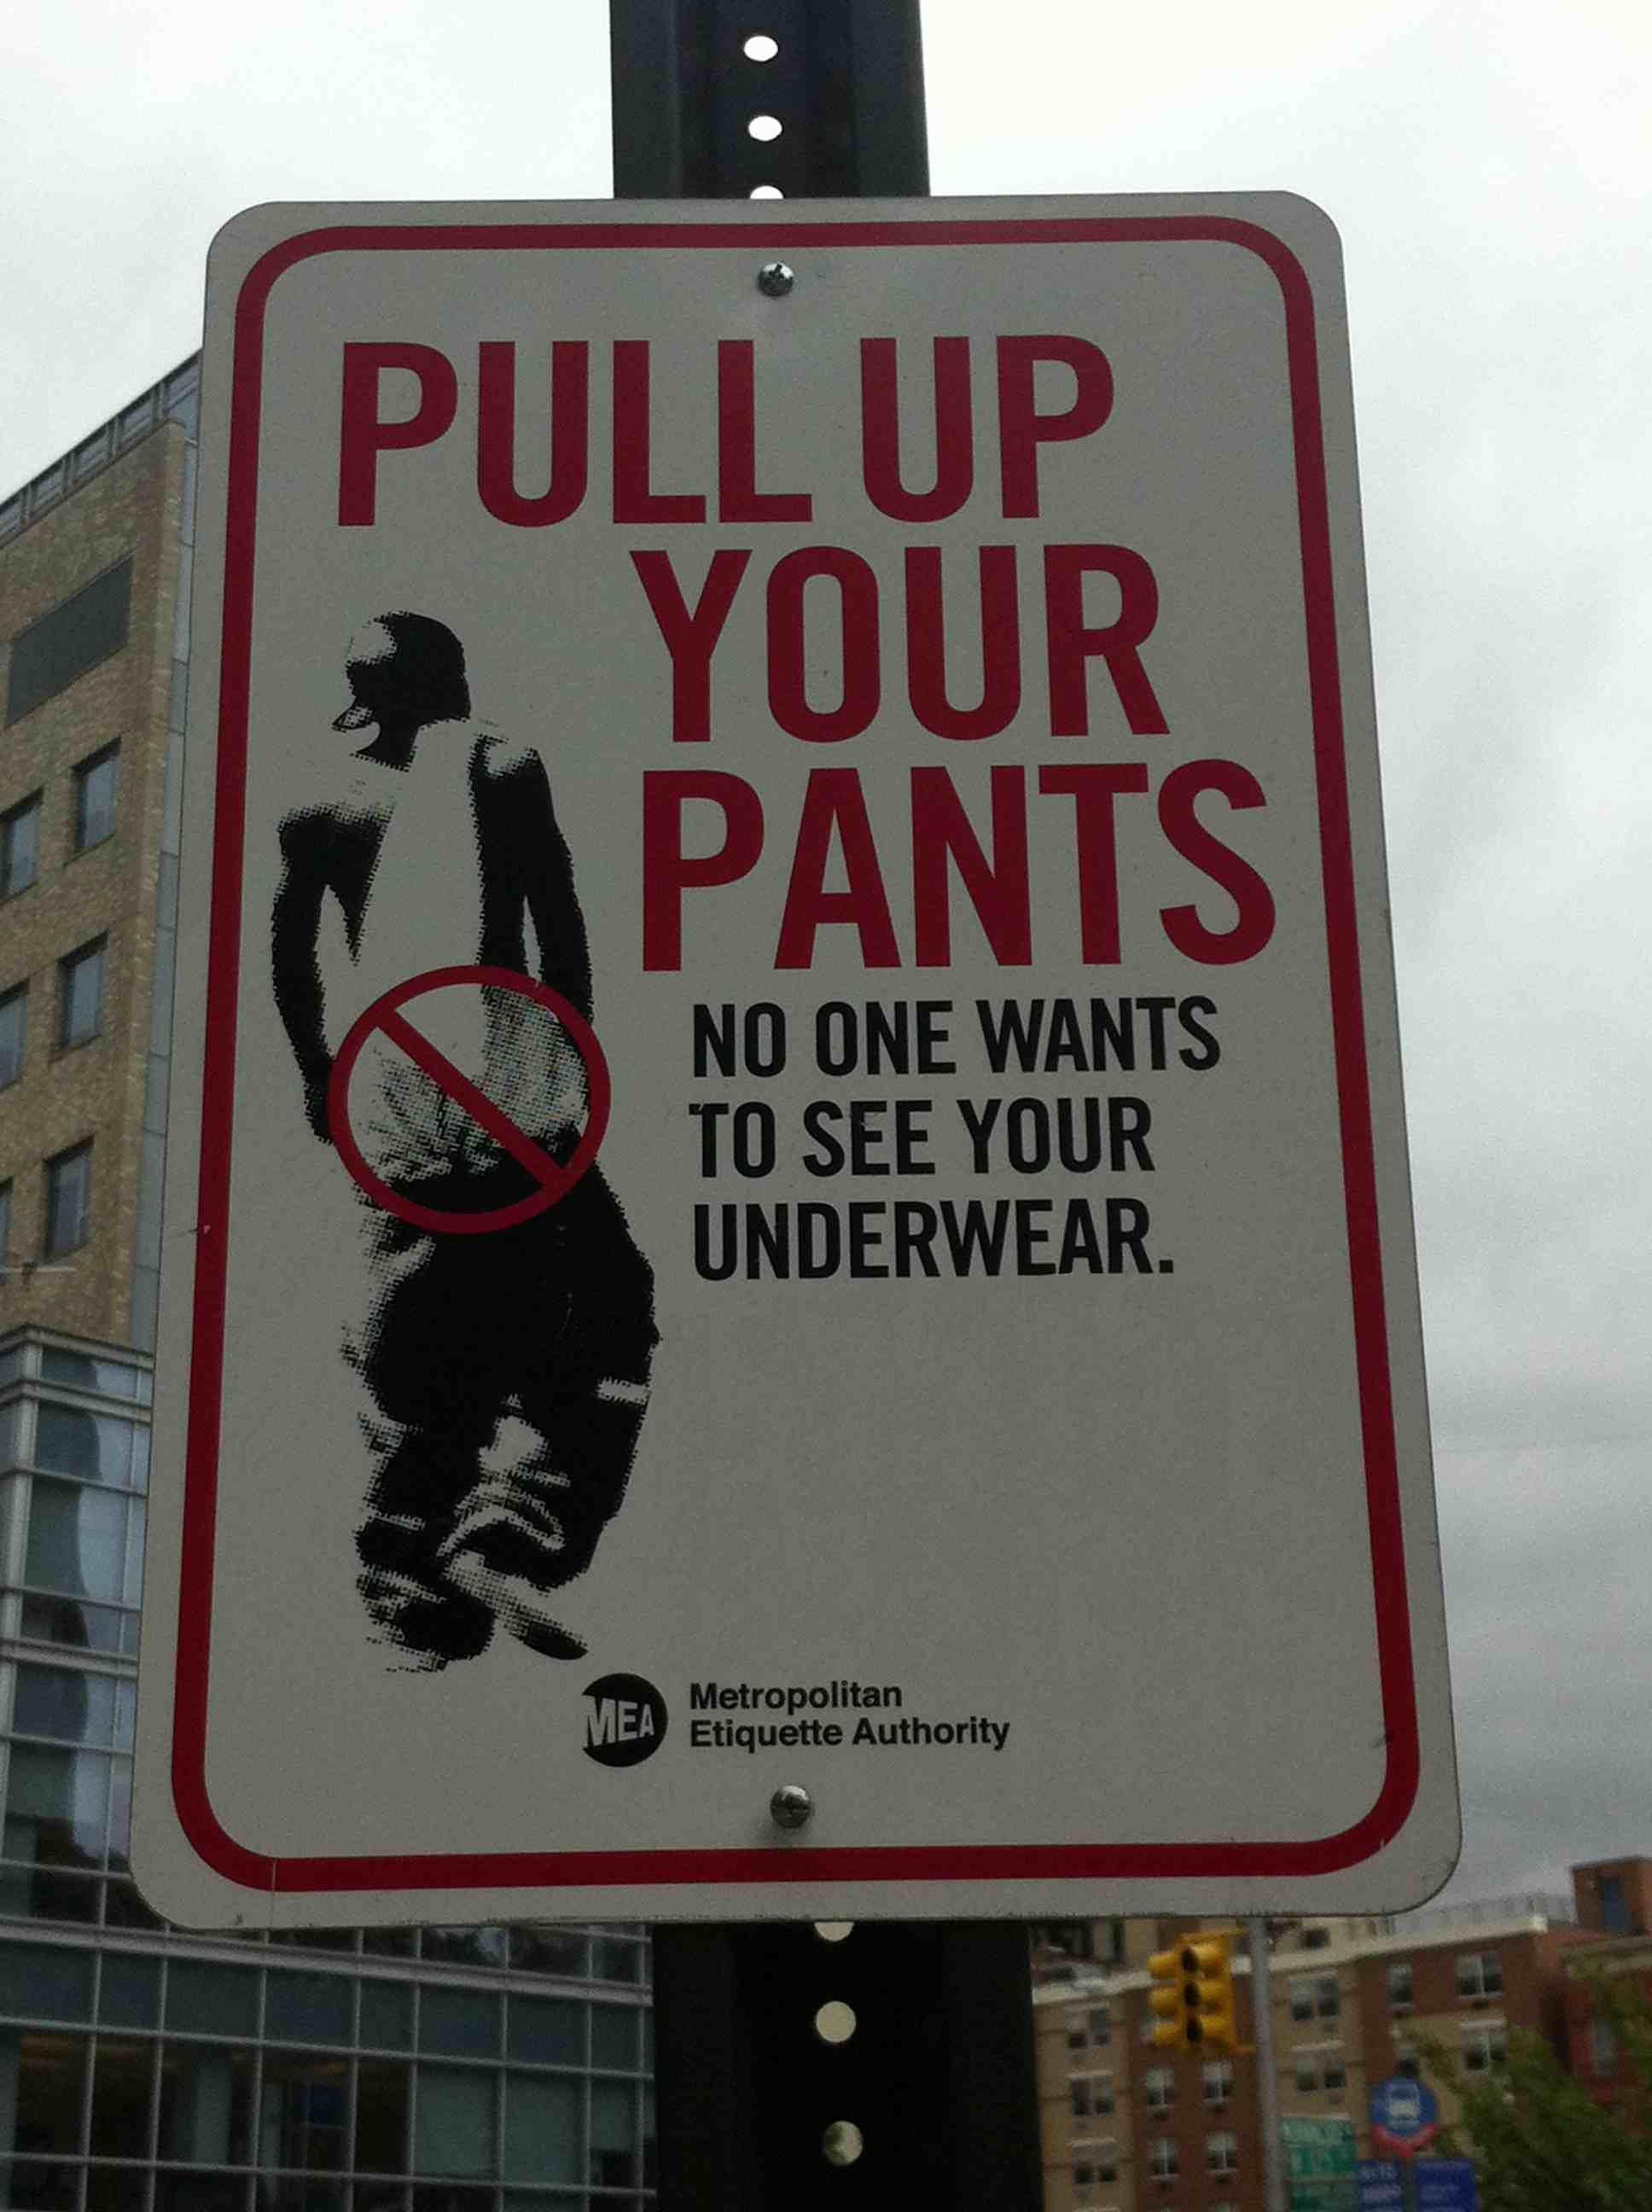 Photo of a sign I saw in Harlem street NYC